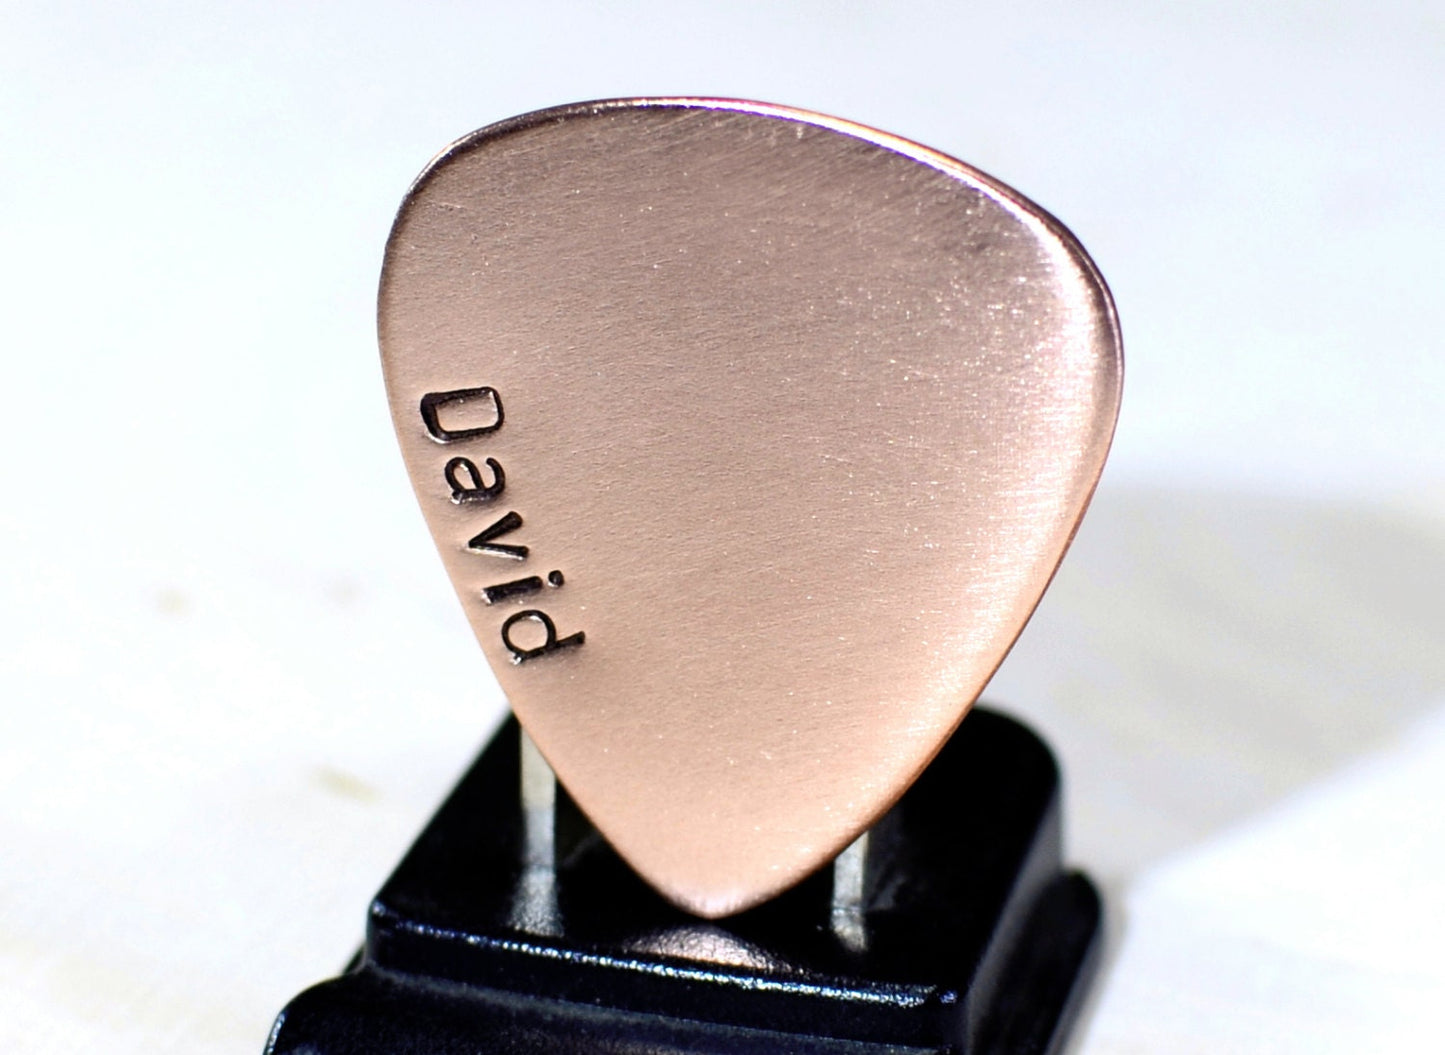 Personalized Copper Guitar Pick with Name Down the Side - perfect little gift that is usable - playable copper plectrum - custom gift